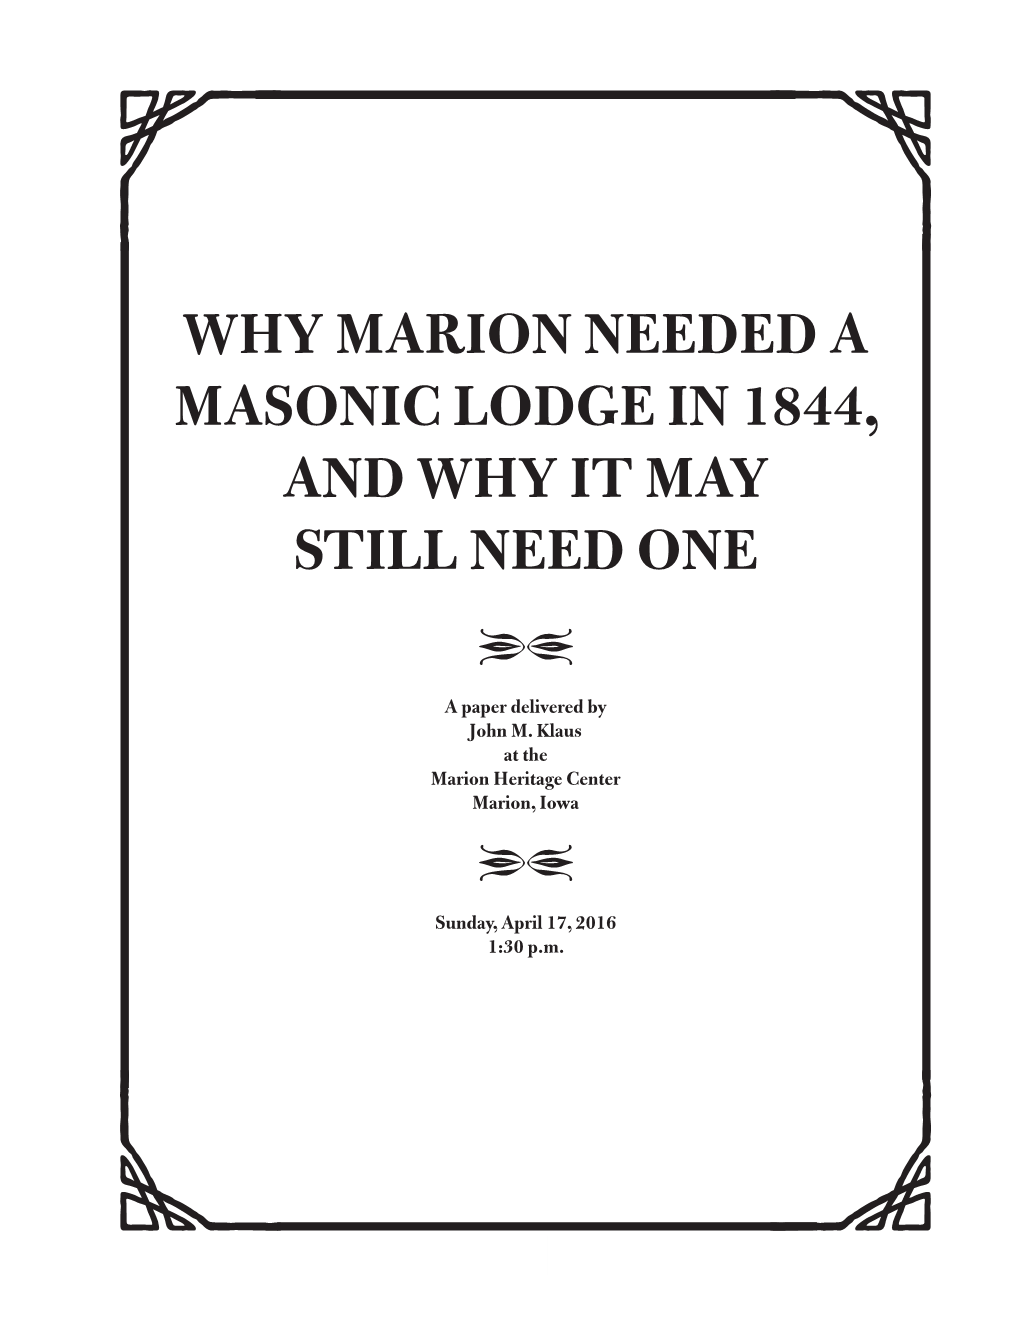 Why Marion Needed a Masonic Lodge in 1844, and Why It May Still Need One